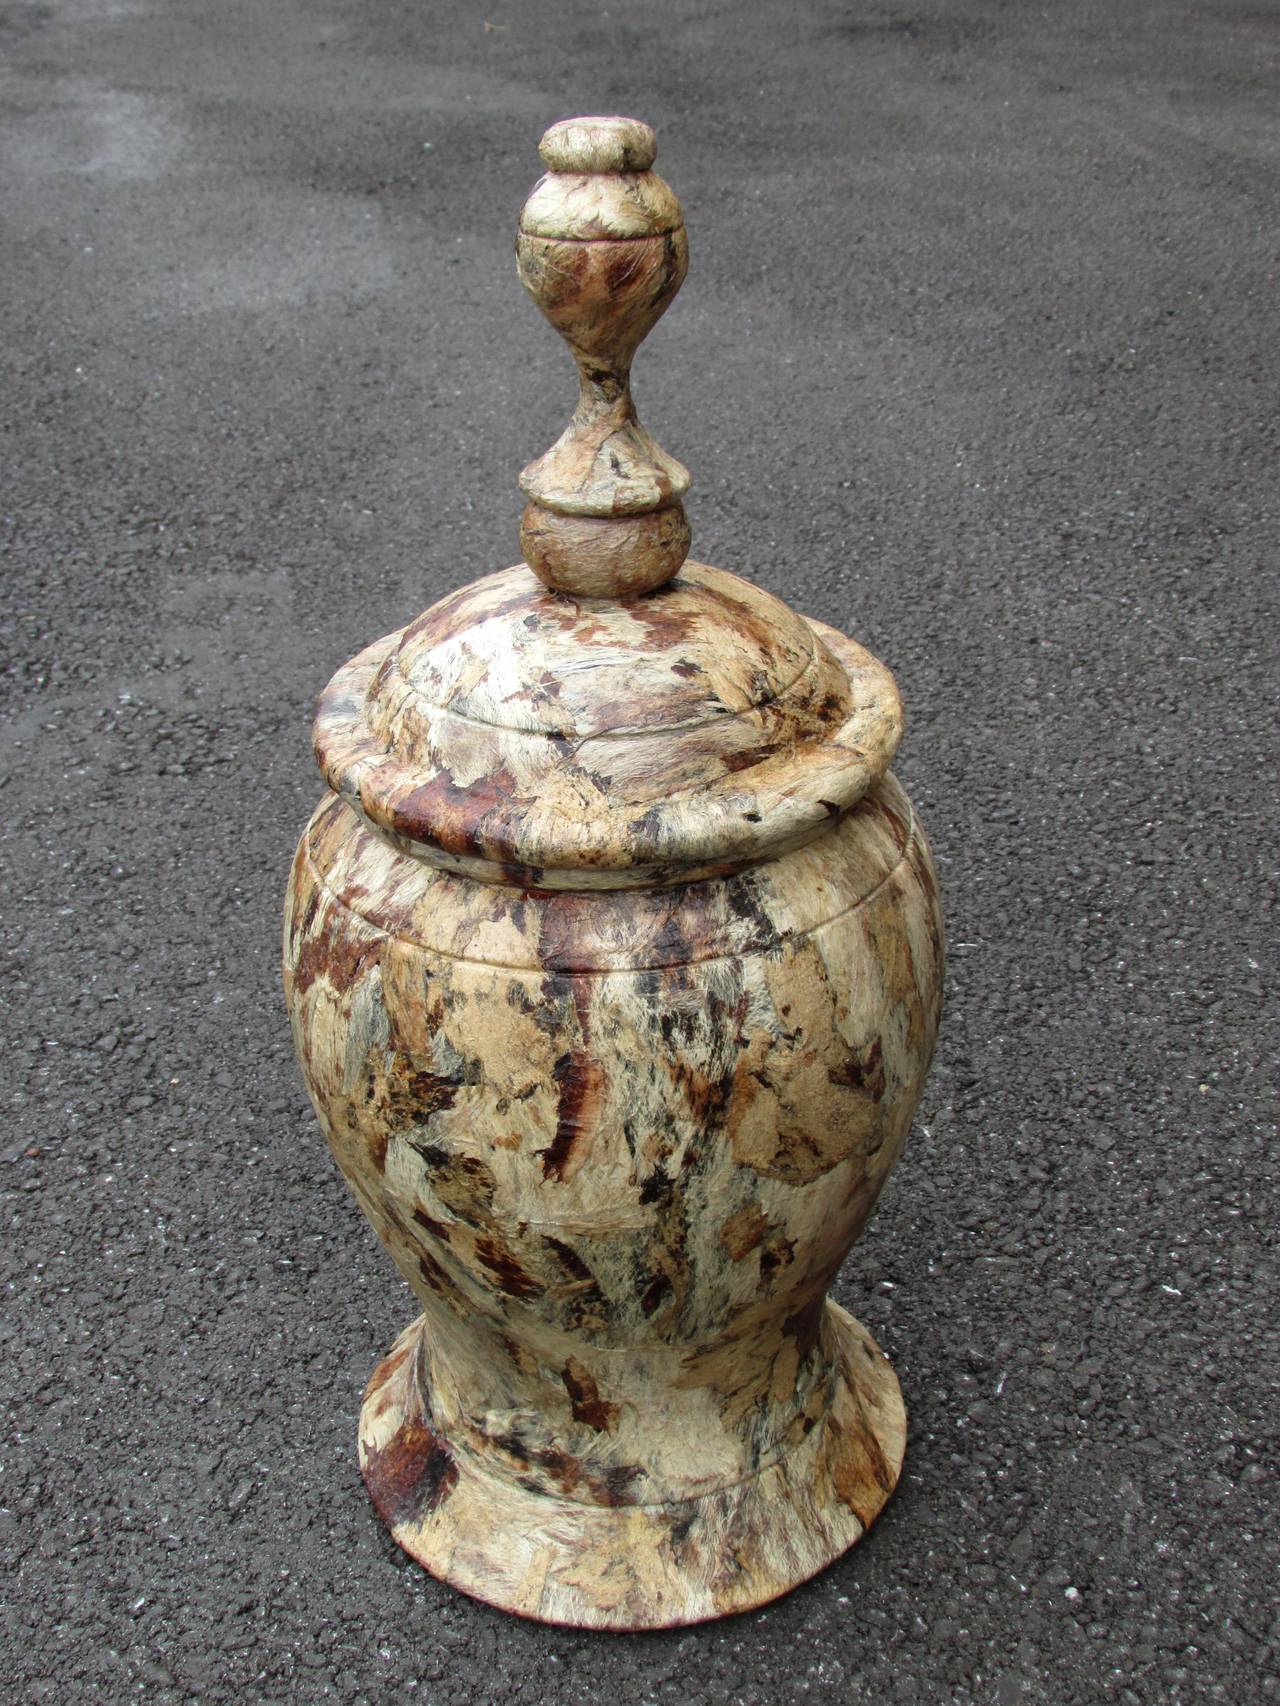 wooden turned urn with lid covered in bark fiber